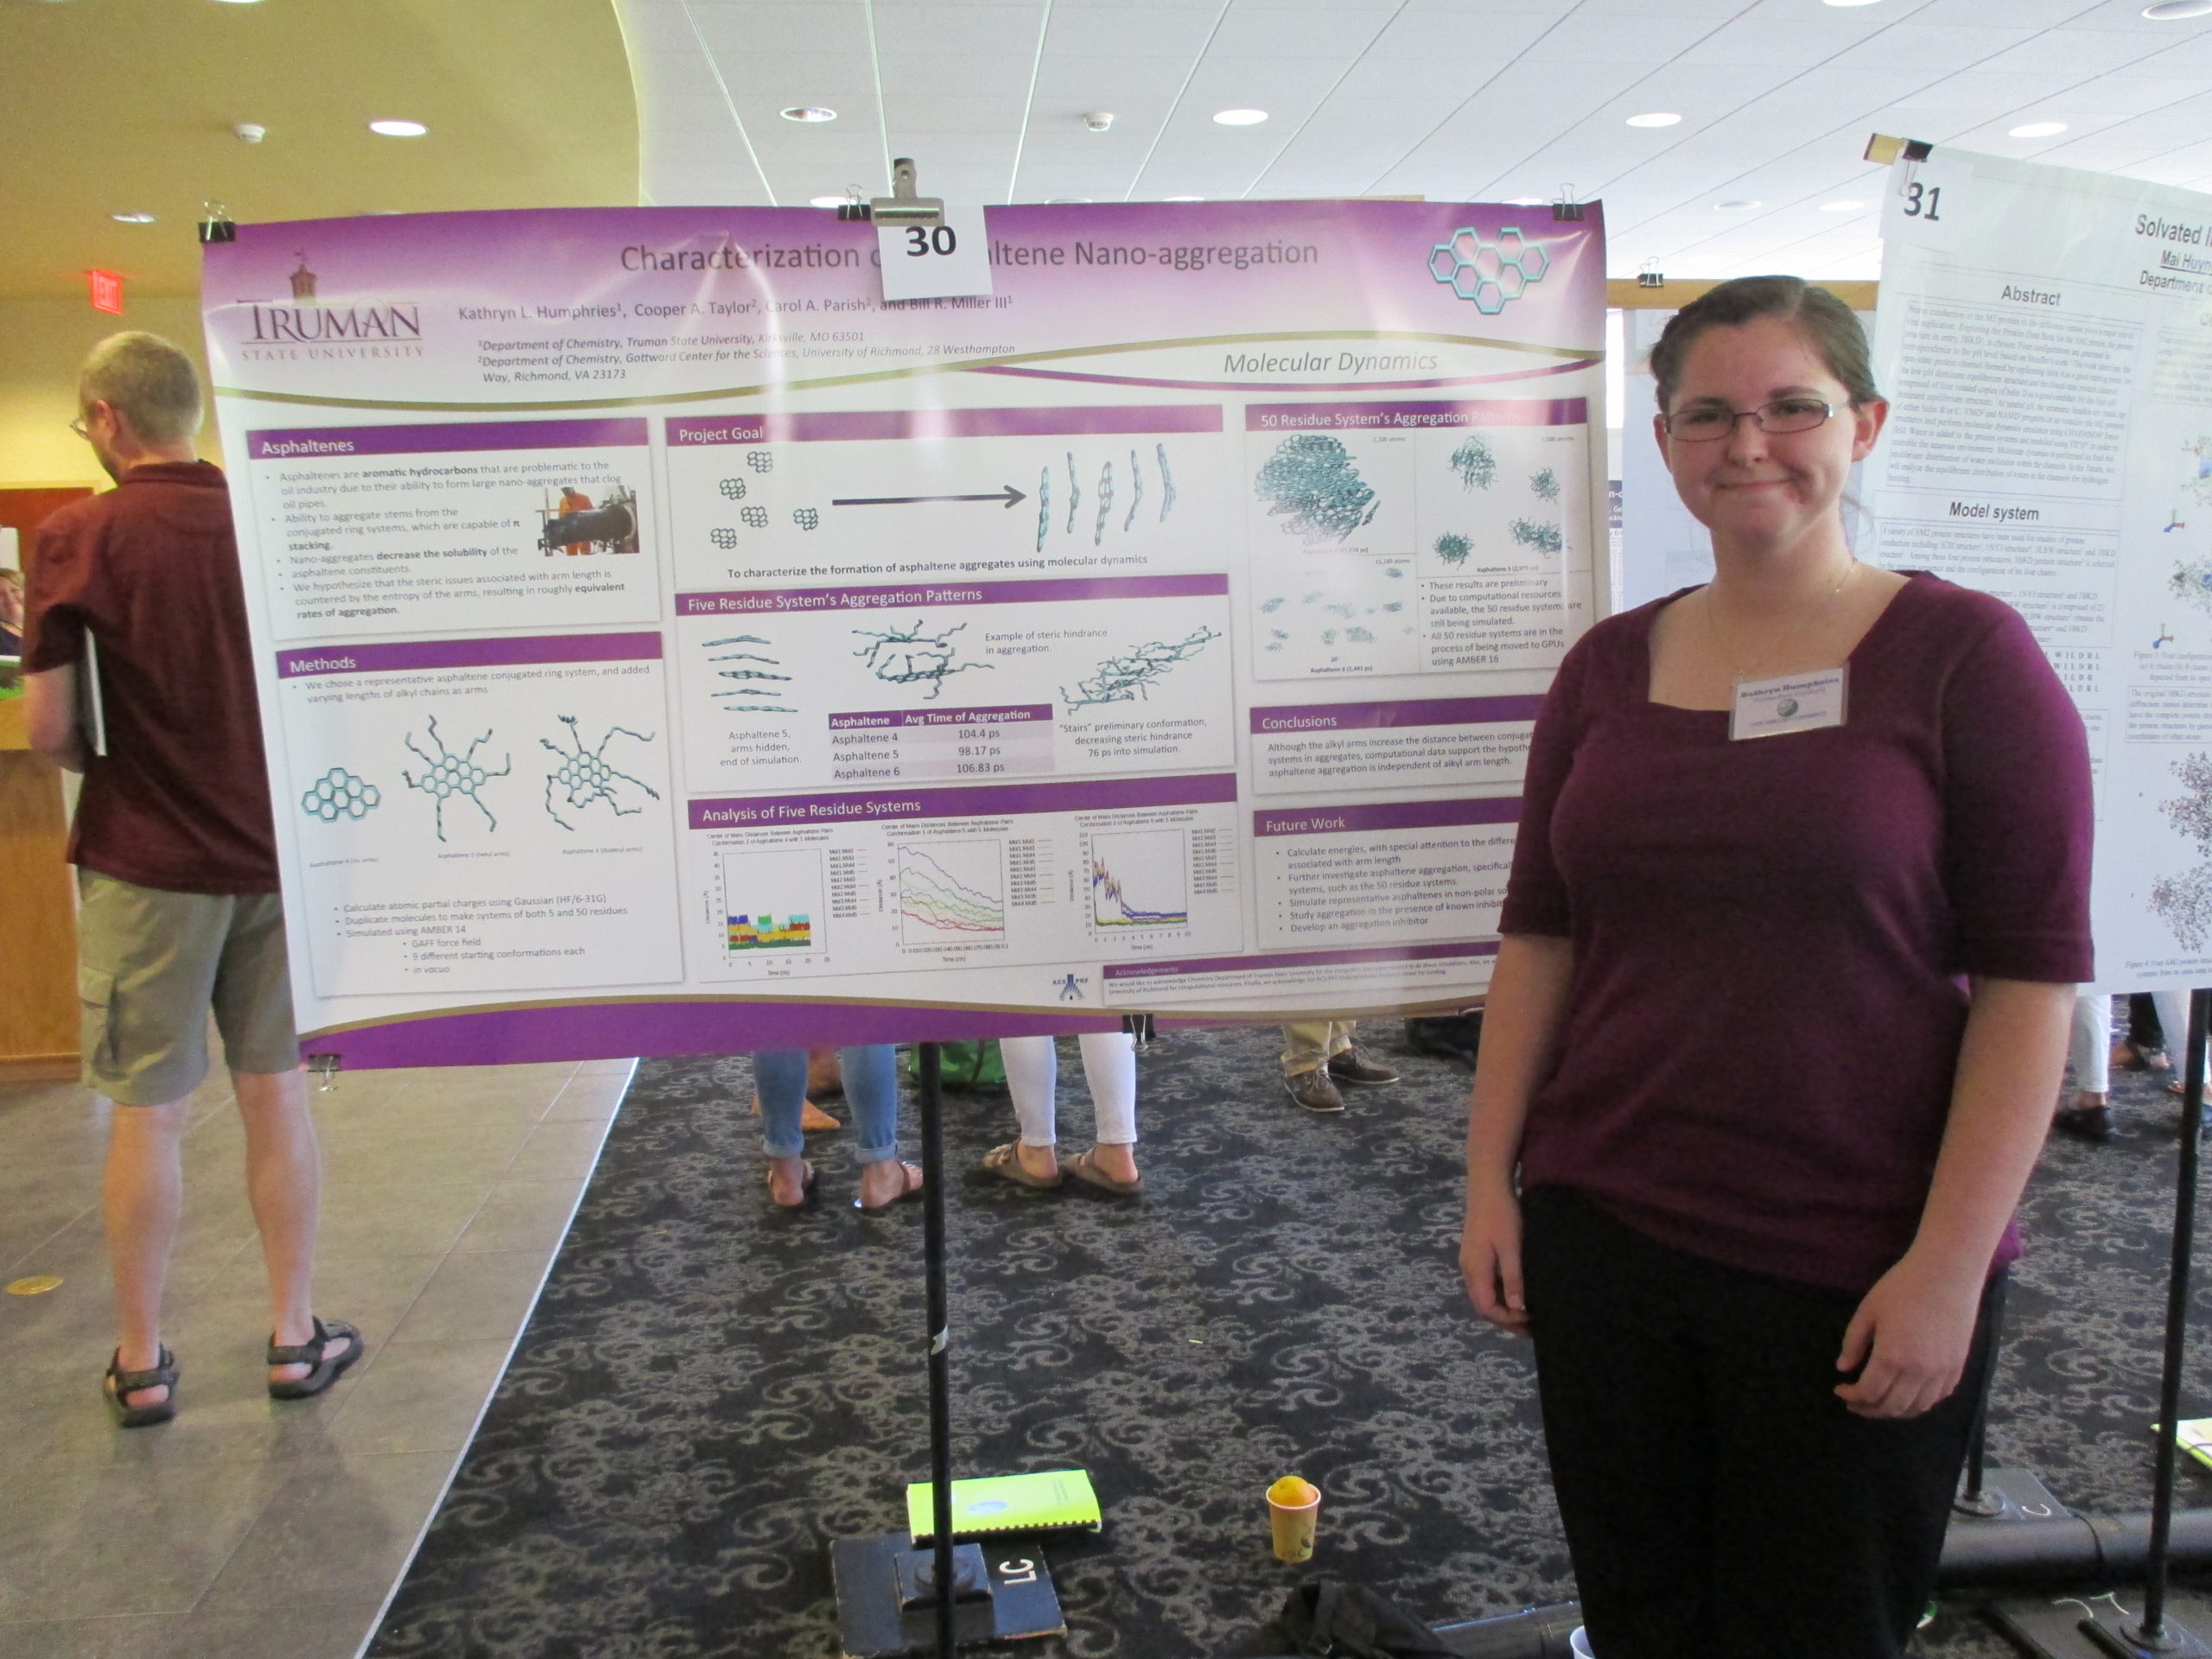 Katy in front of her research poster on asphaltene aggregation